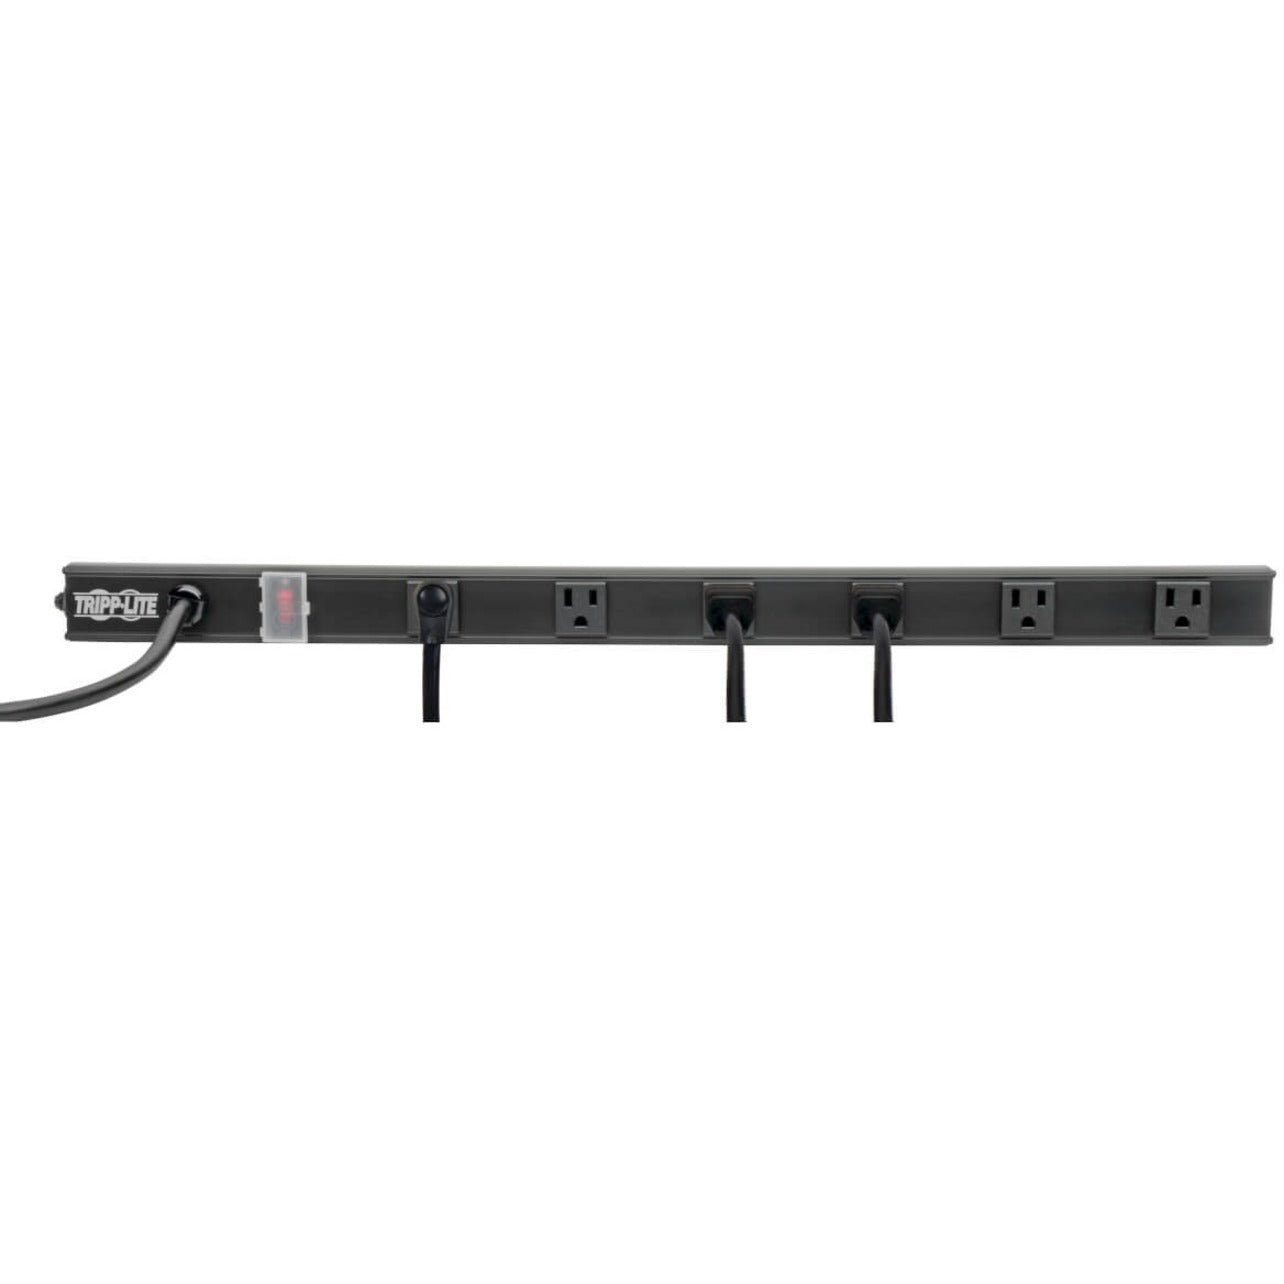 Tripp Lite 6-Outlet Power Strip Right-Angle NEMA 5-15R 15A 120V 8 ft. (2.43 m) Cord Right-Angle 5-15P Plug 24 in.